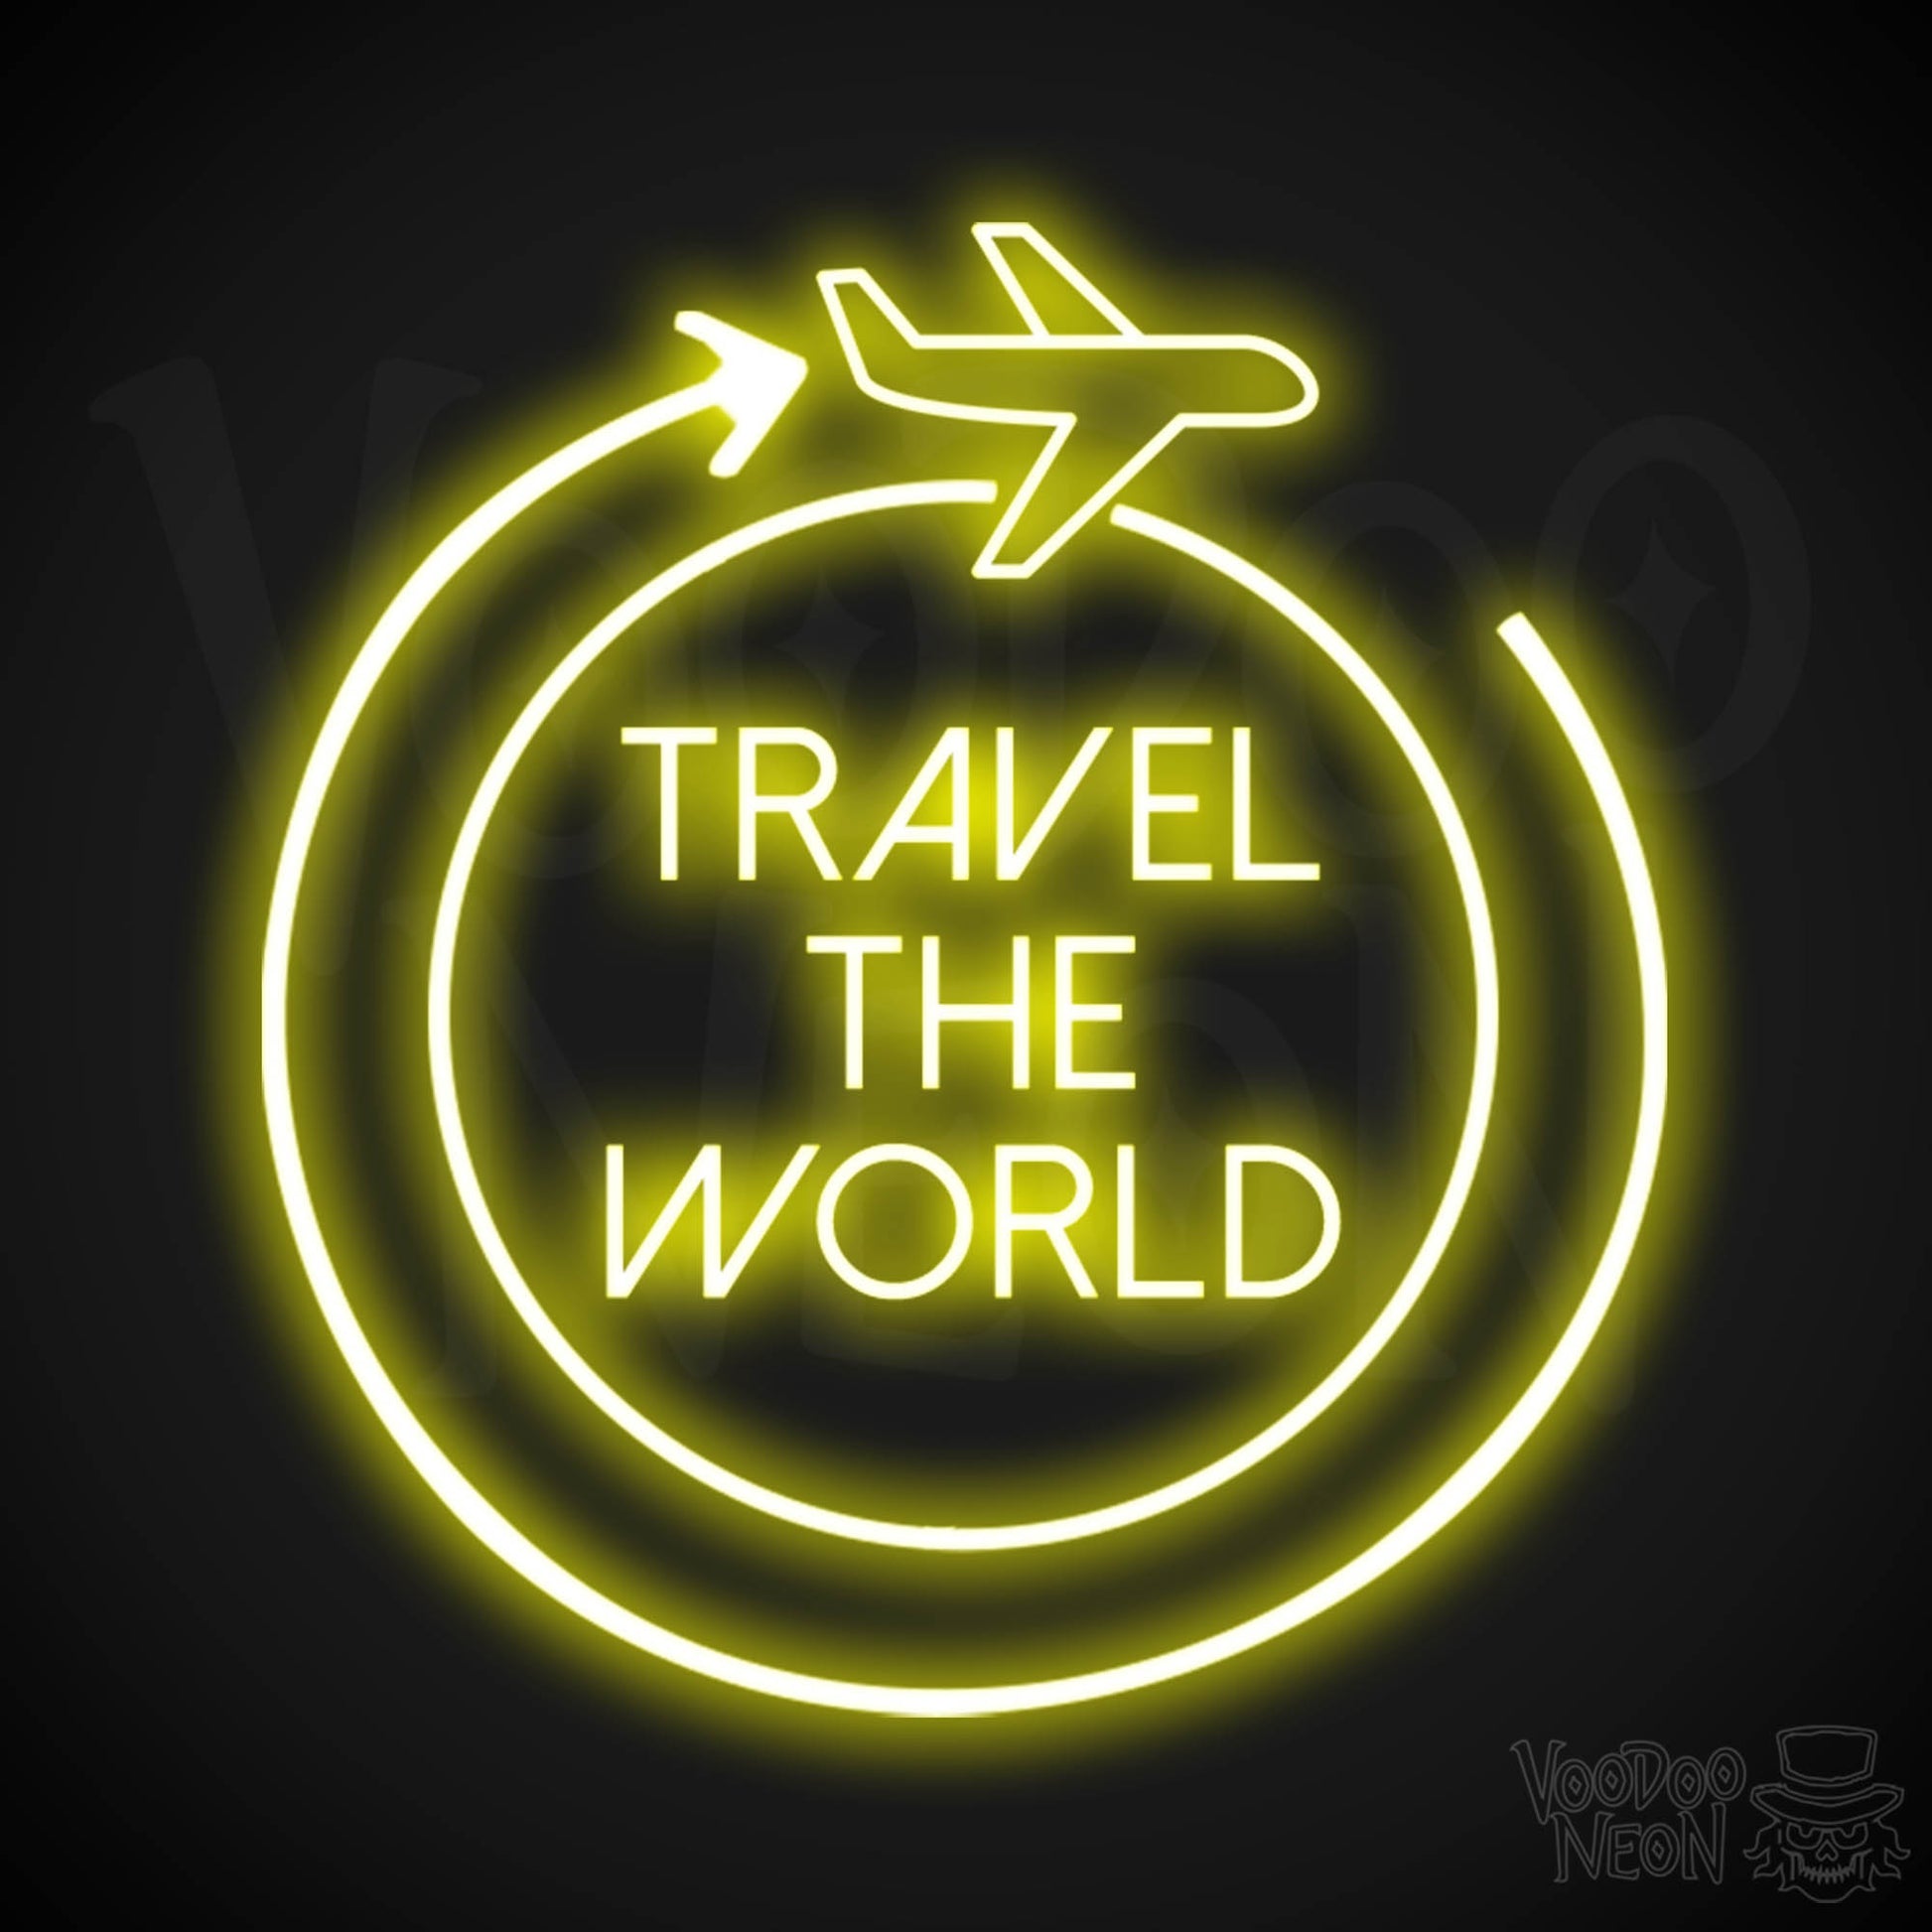 Let's Travel The World Neon Sign - LED Neon Wall Art - Color Yellow